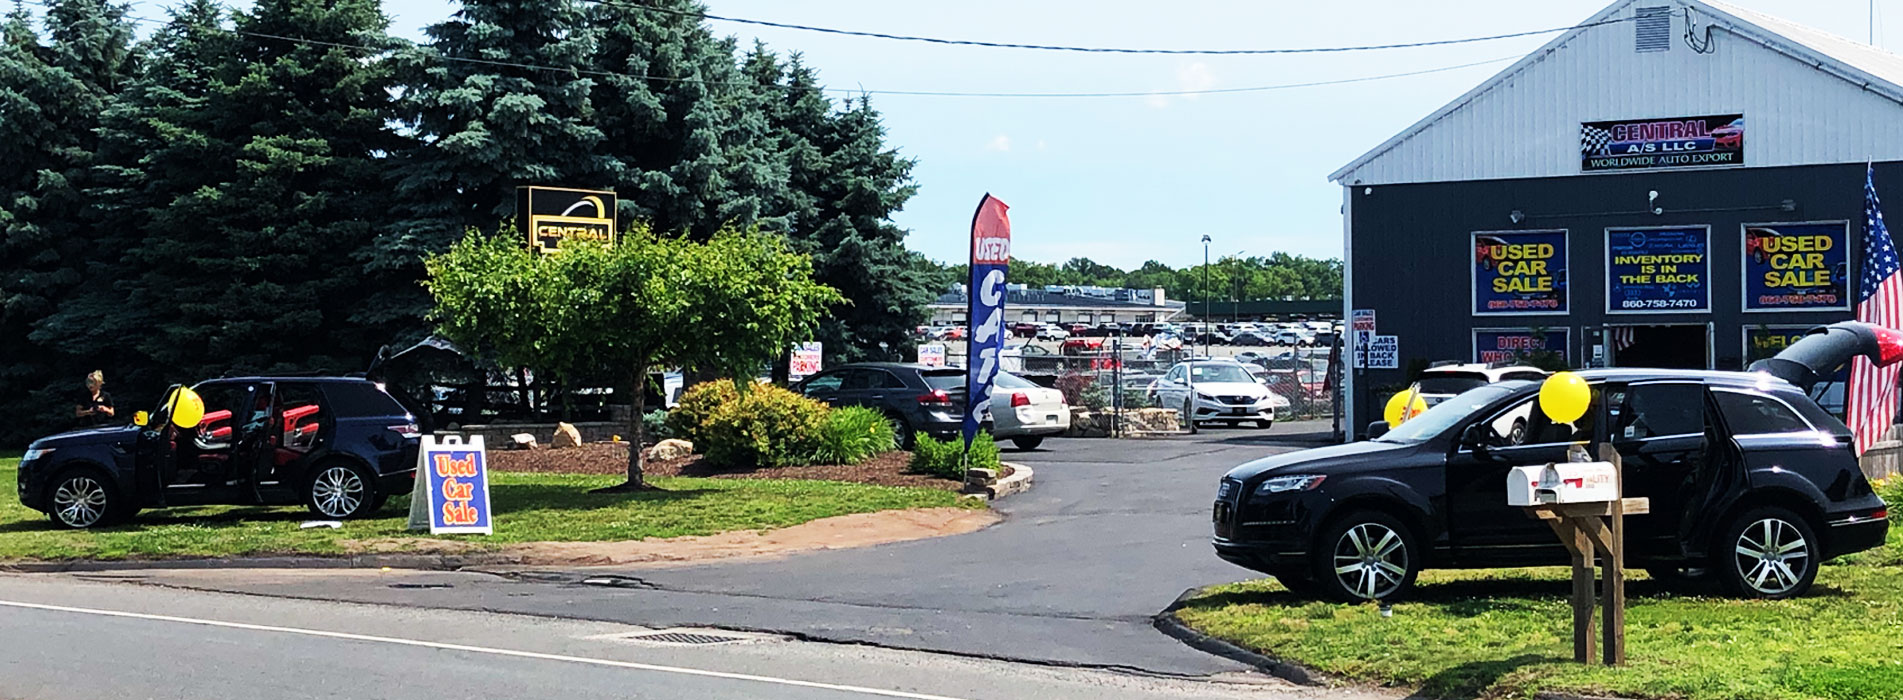 Used cars for sale in East Windsor | Central A/S LLC. East Windsor Connecticut